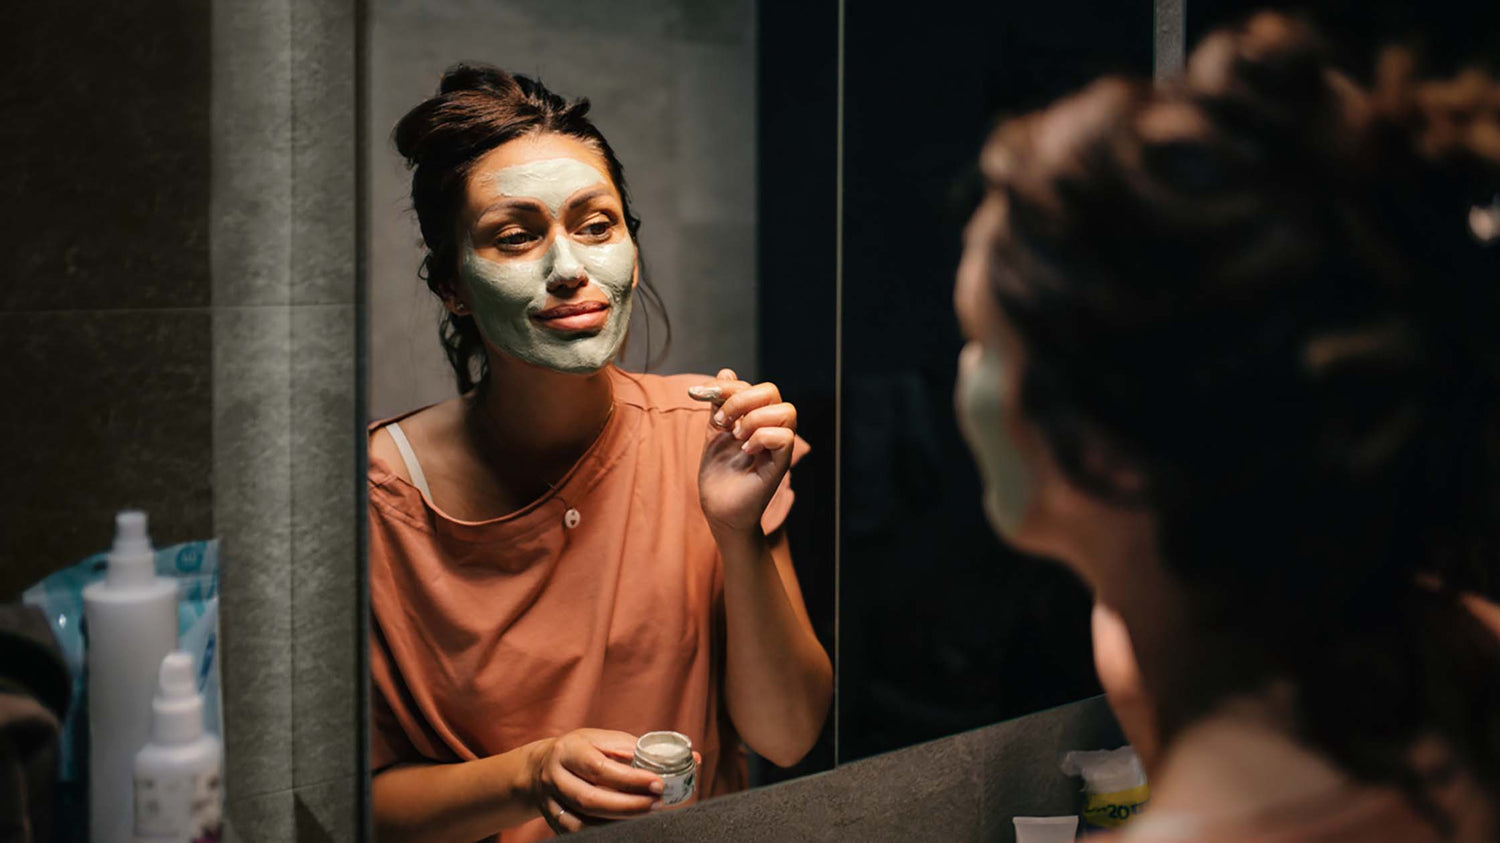 Nighttime skincare routine for glowing skin